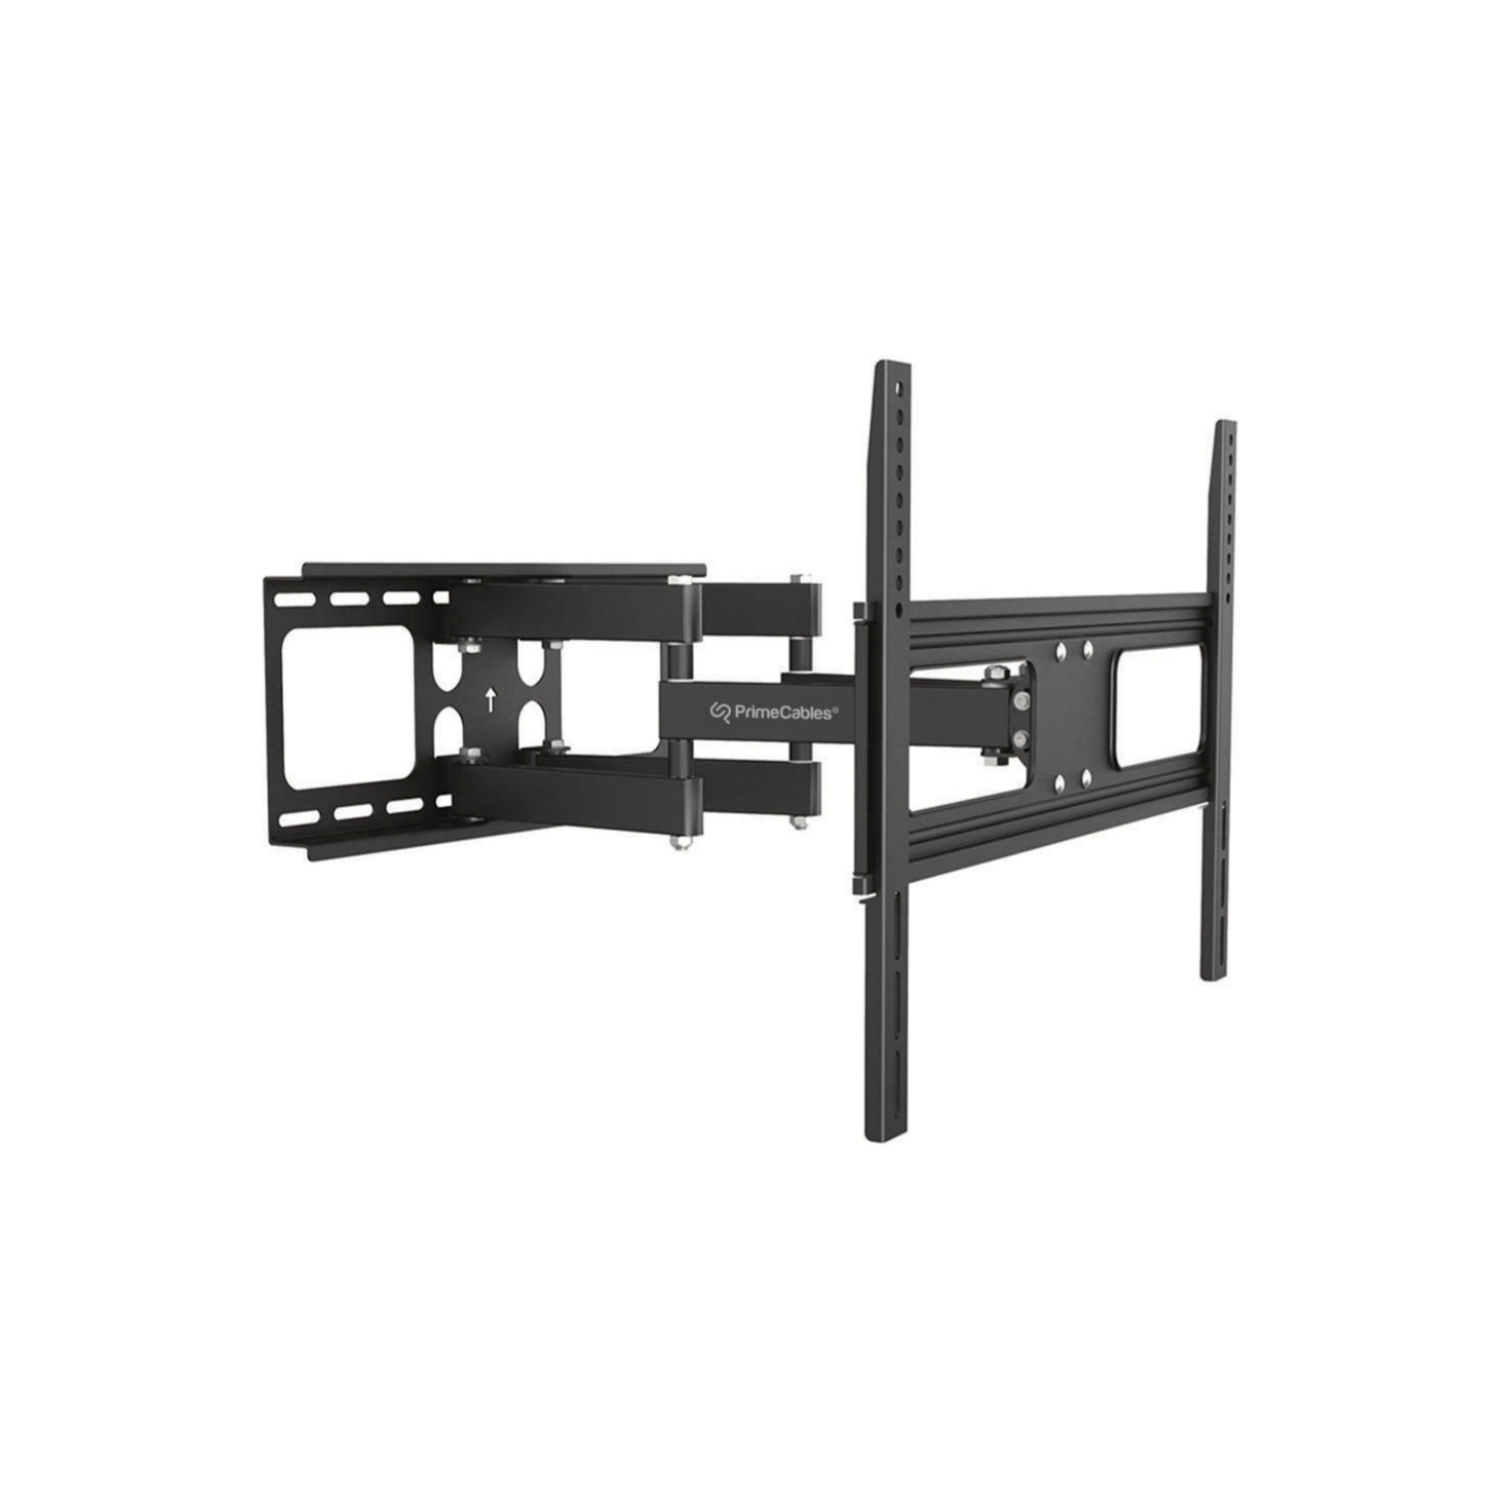 37-70 inch Heavy Duty Full Motion TV Wall Mount with Dual Support 6-Arms Load Bearing up to 110 Lbs, Full-Articulation Swivel TV Mounts Bracket Max VESA 600